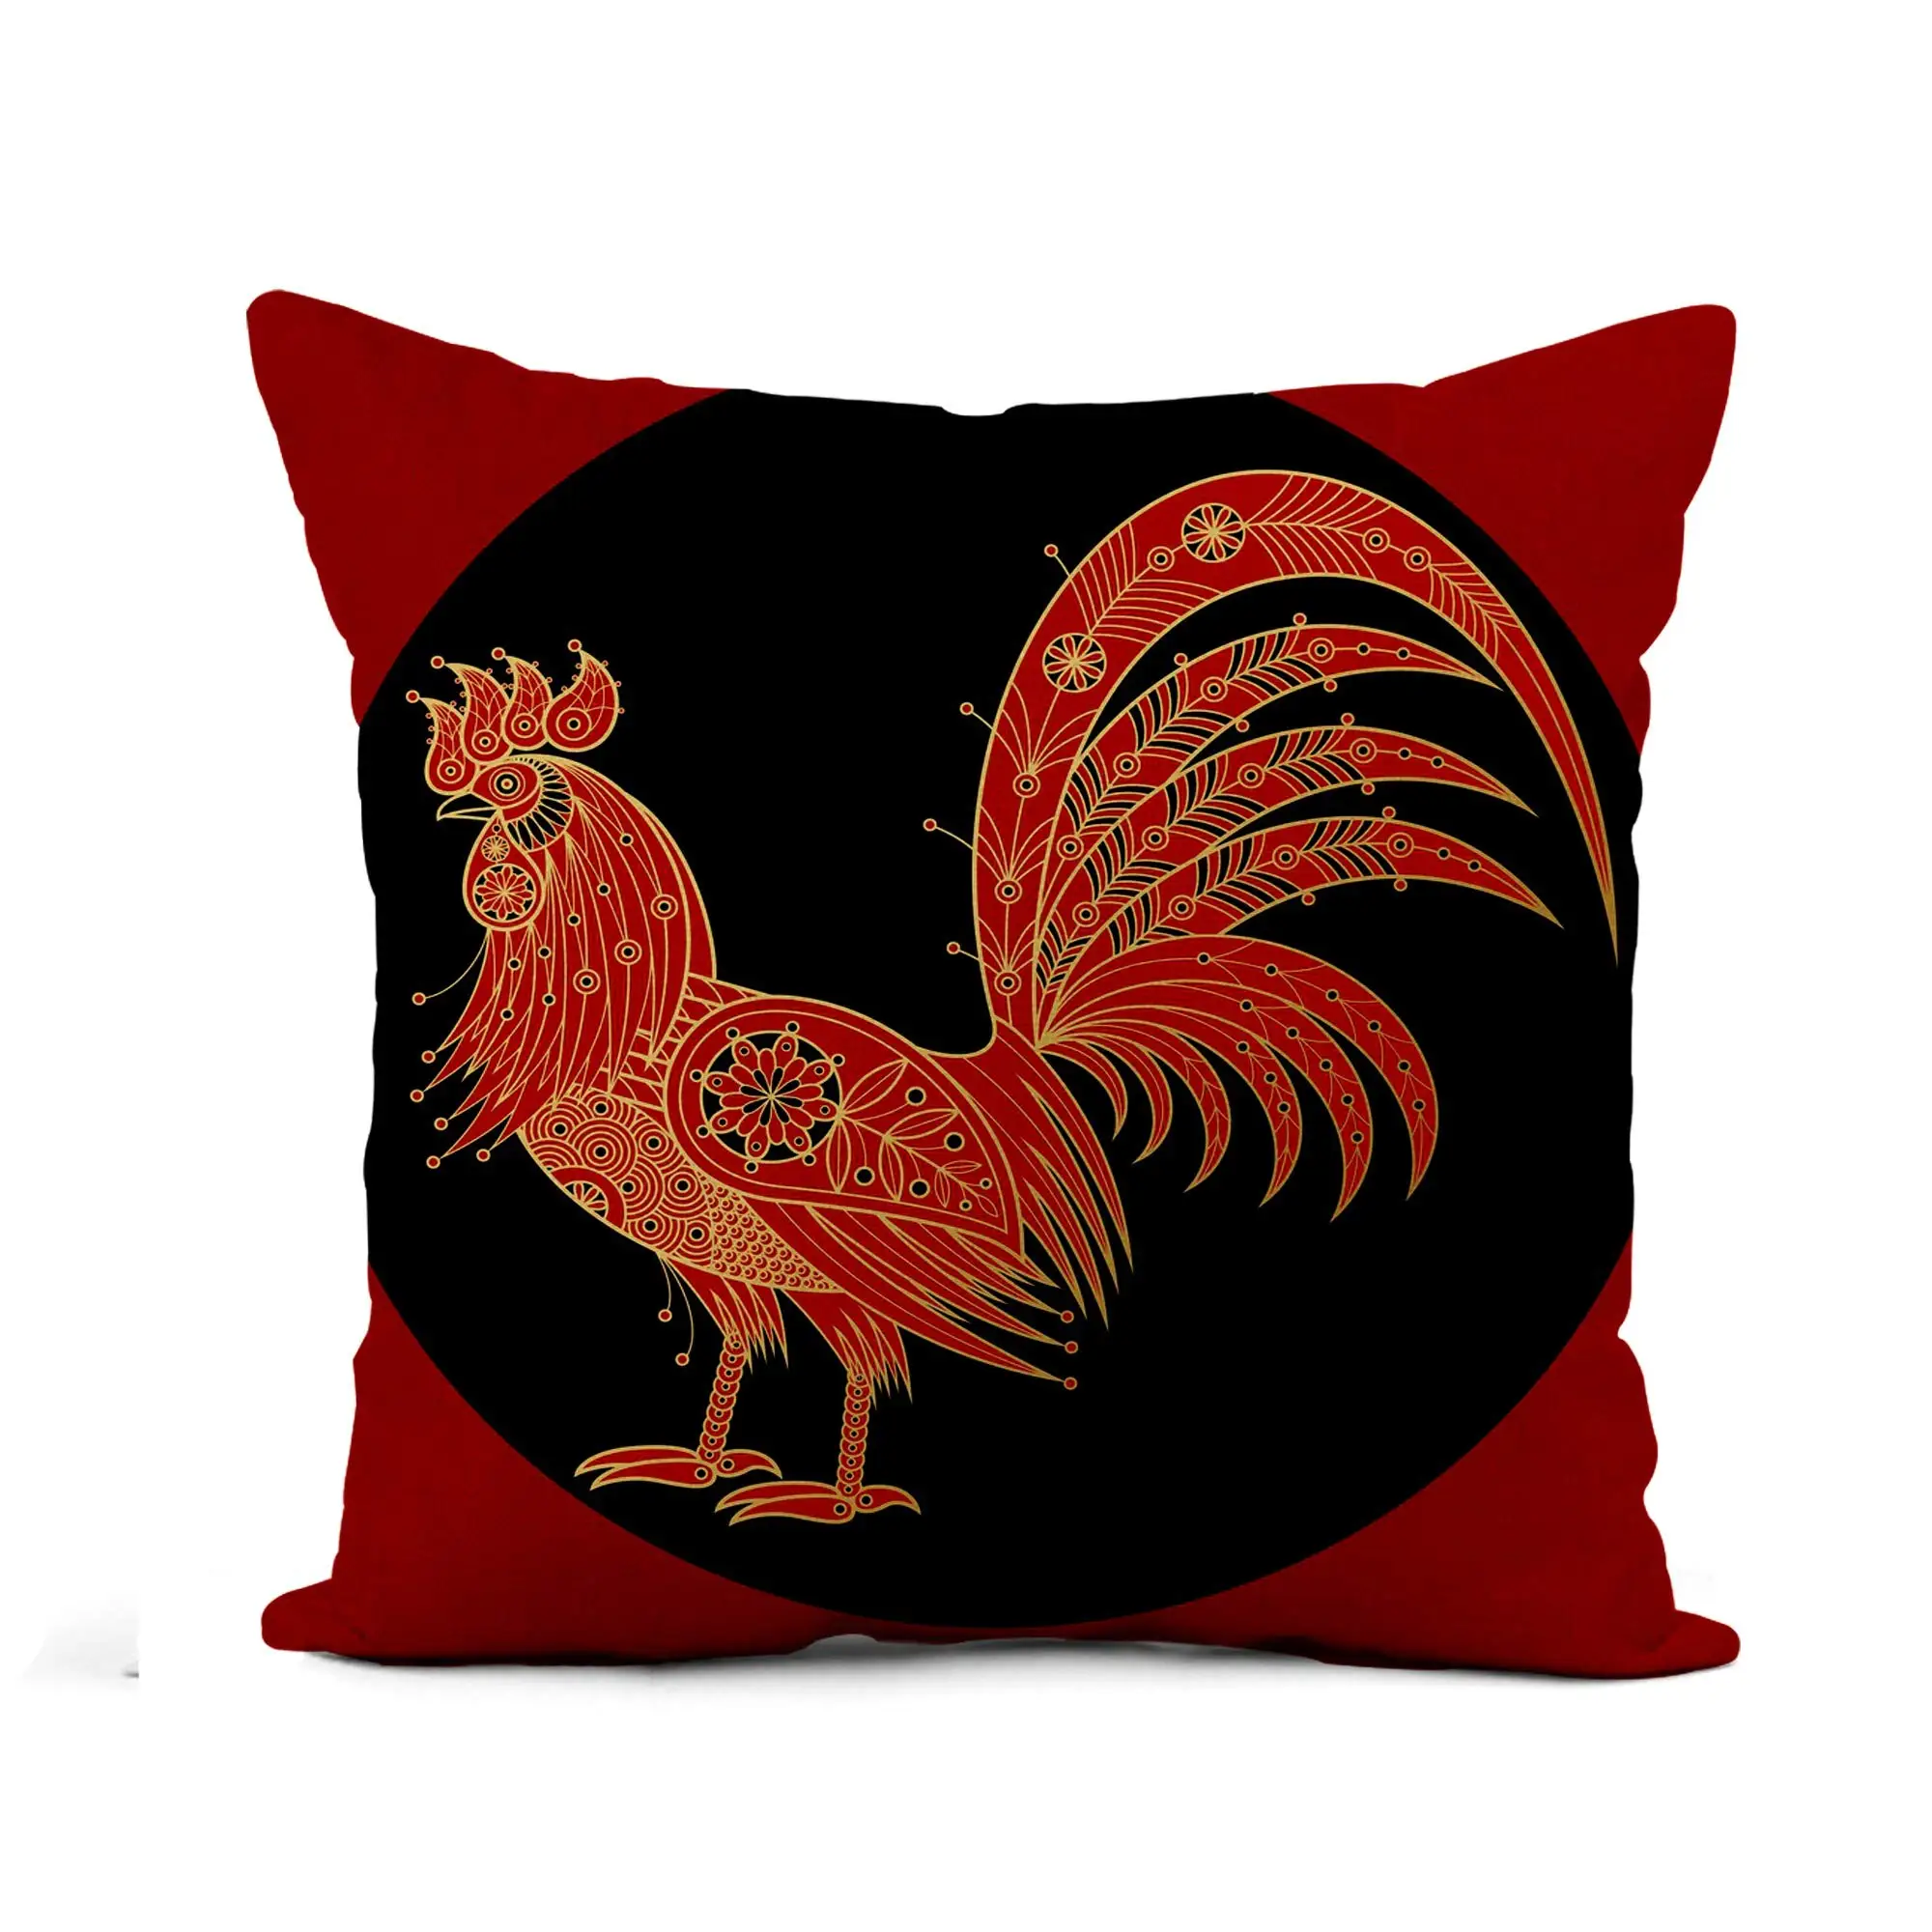 

Flax Throw Pillow Cover Rooster Bird Symbol of The New Year Chinese Calendar 18x18 Inches Pillowcase Home Decor Square Cotton